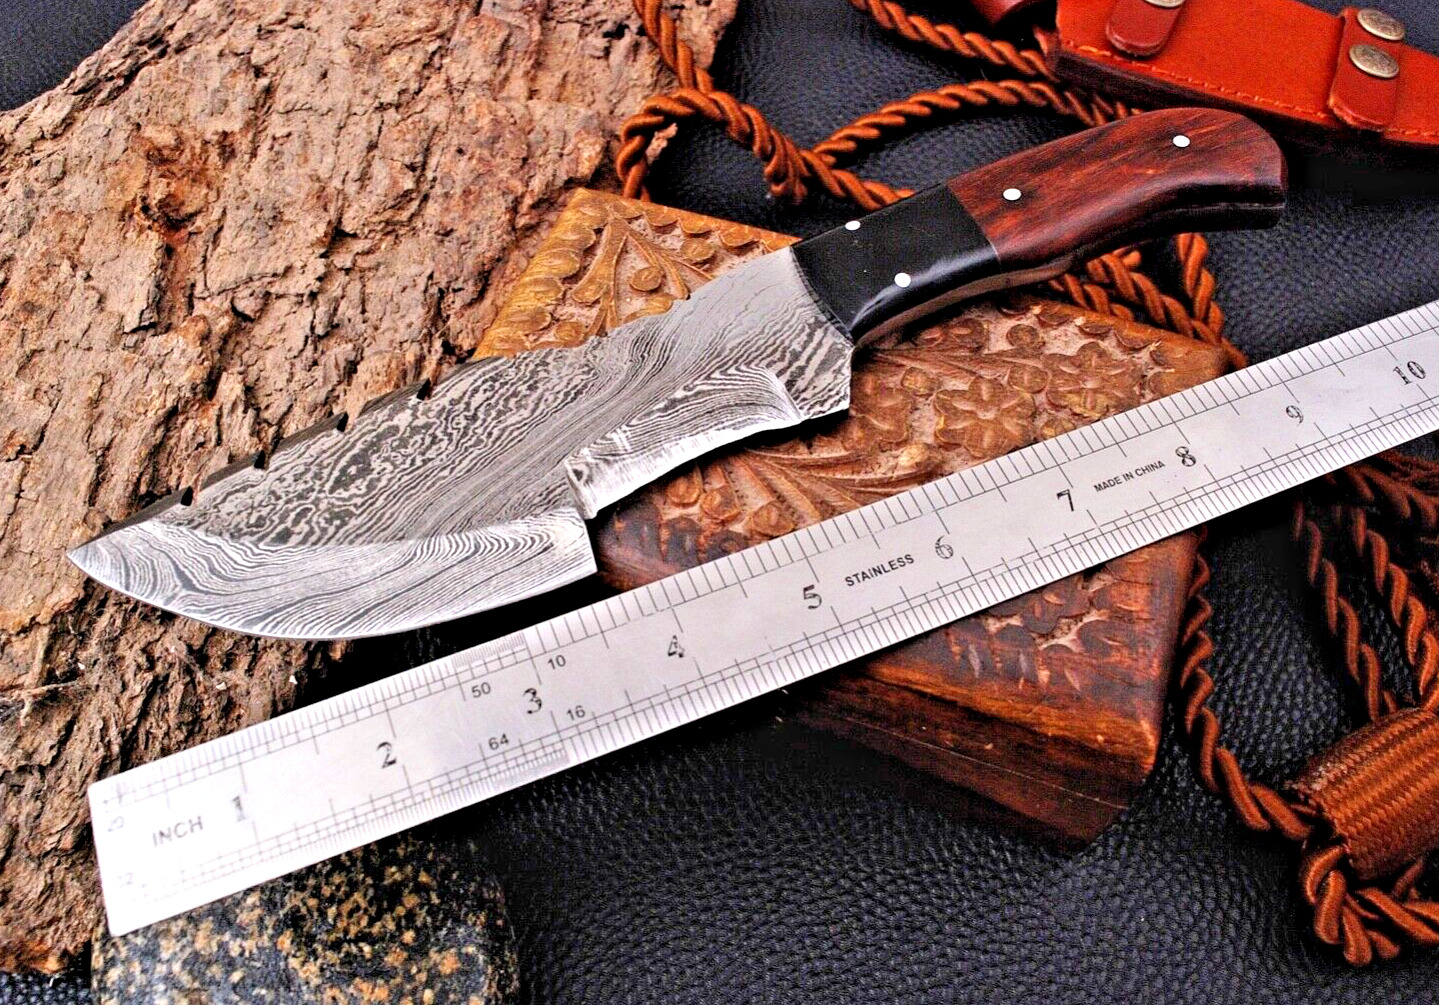 Tactical Tracker Hunting Knife Bushcraft - Hand Forge Damascus Steel 1818